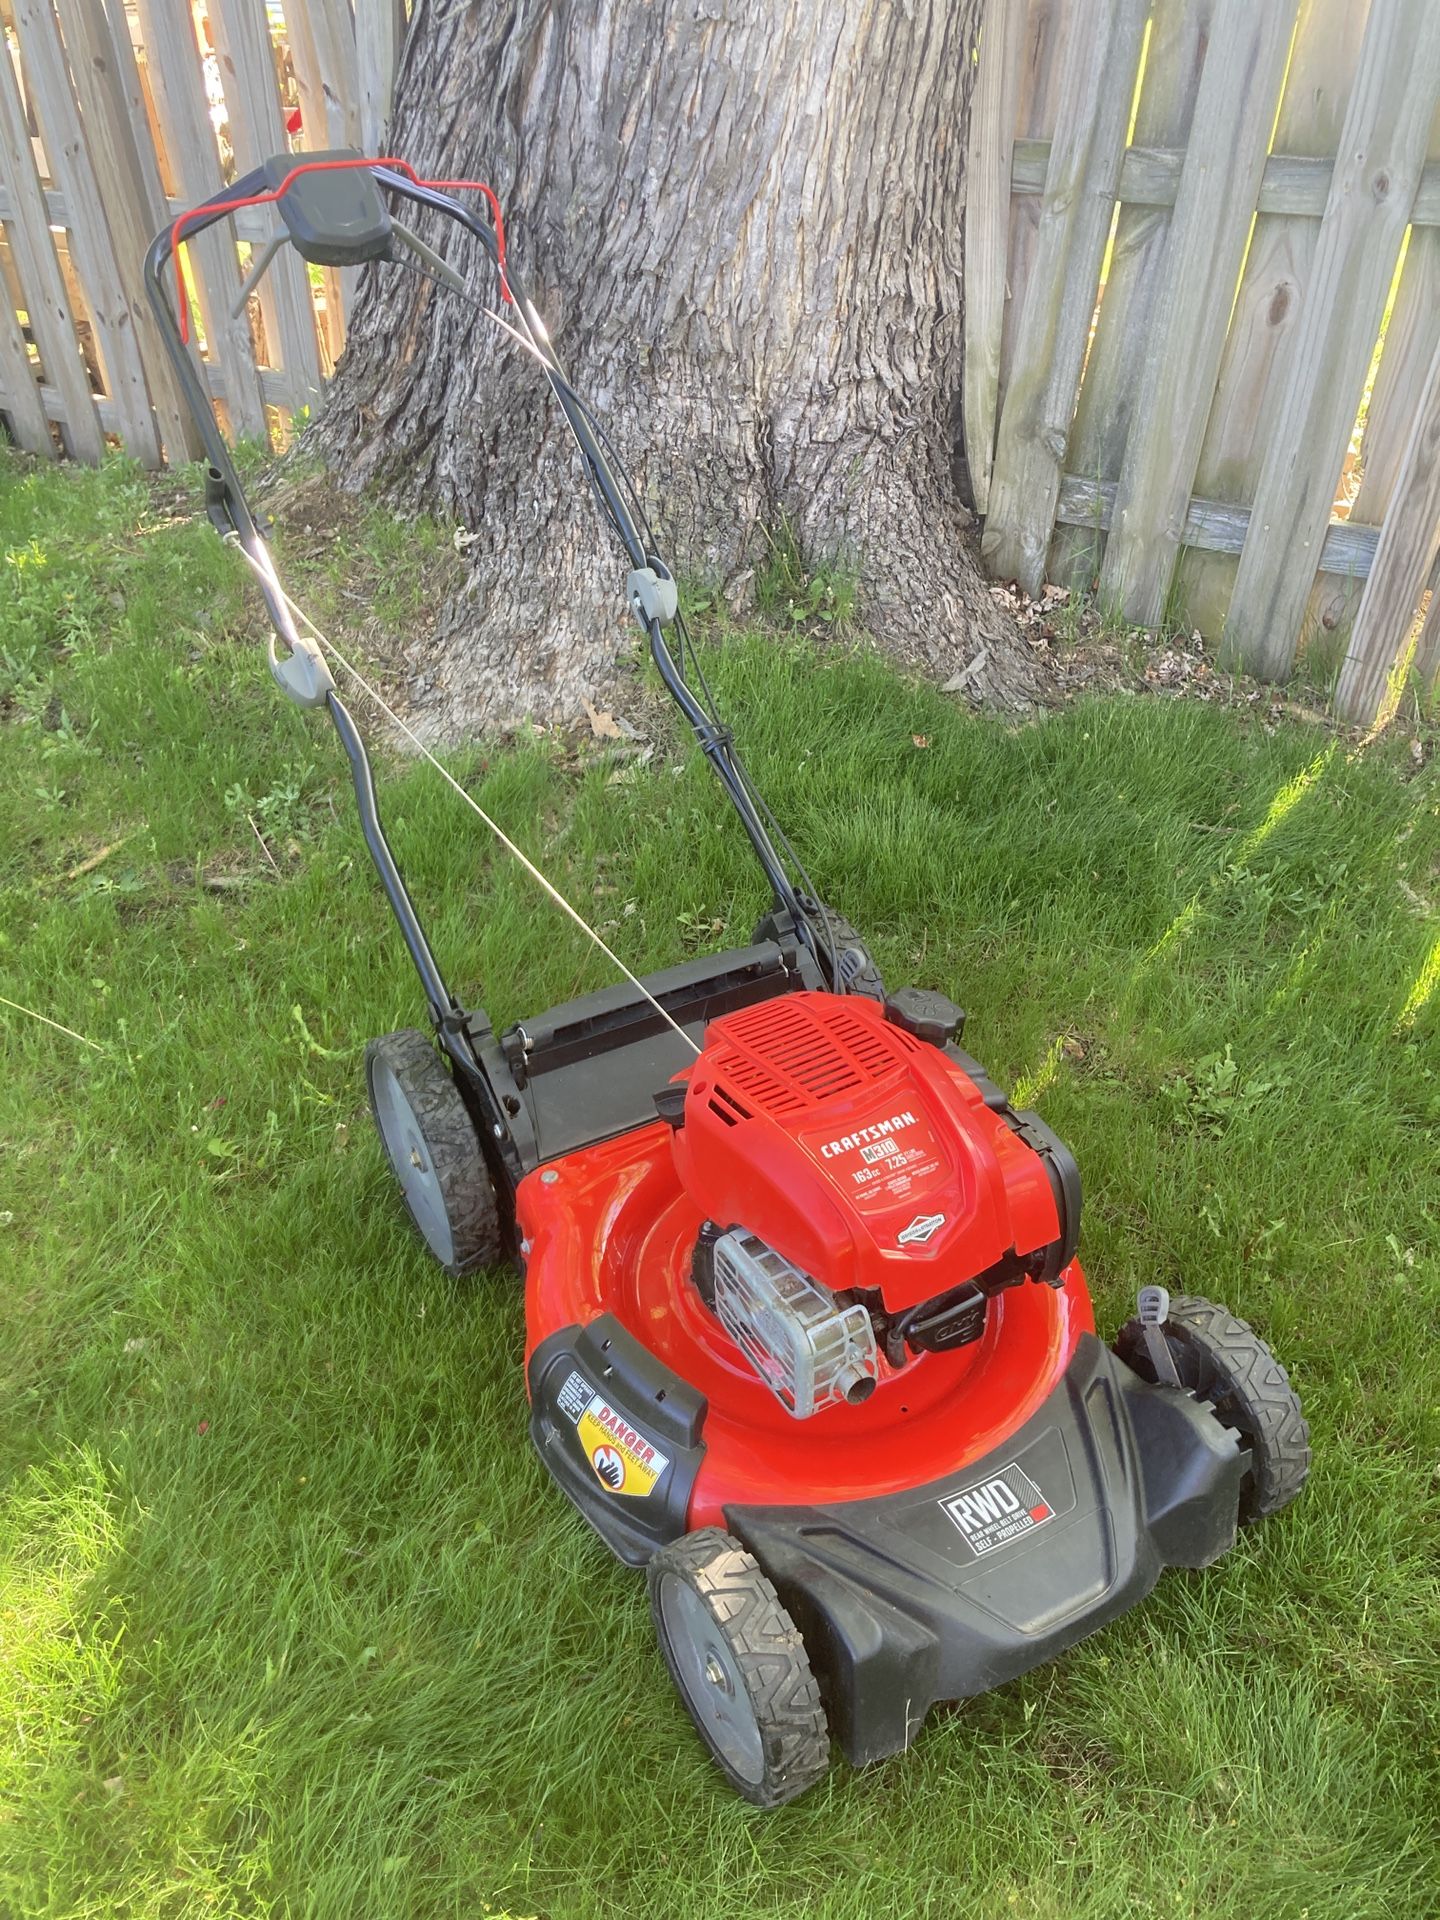 Craftsman Lawn Mower With Self Propel 